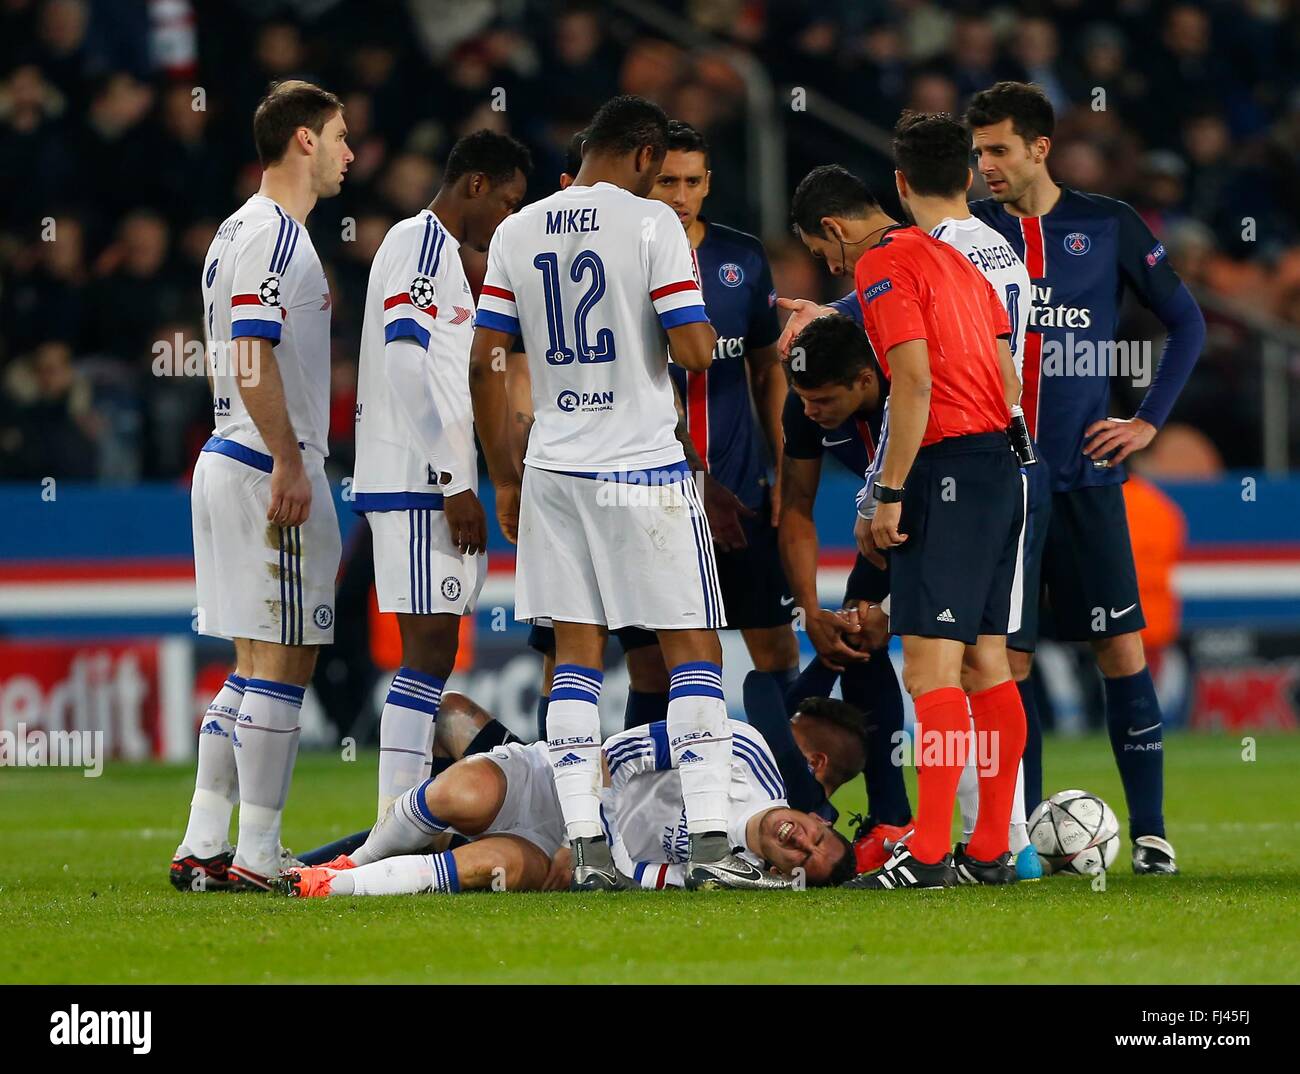 Chelsea’s Eden Hazard grimaces after a tackle from Marco Verratti of PSG during the UEFA Champions League round of 16 match between Paris Saint-Germain and Chelsea at the Parc des Princes Stadium in Paris. February 16, 2016. James Boardman / Telephoto Images +44 7967 642437 Stock Photo